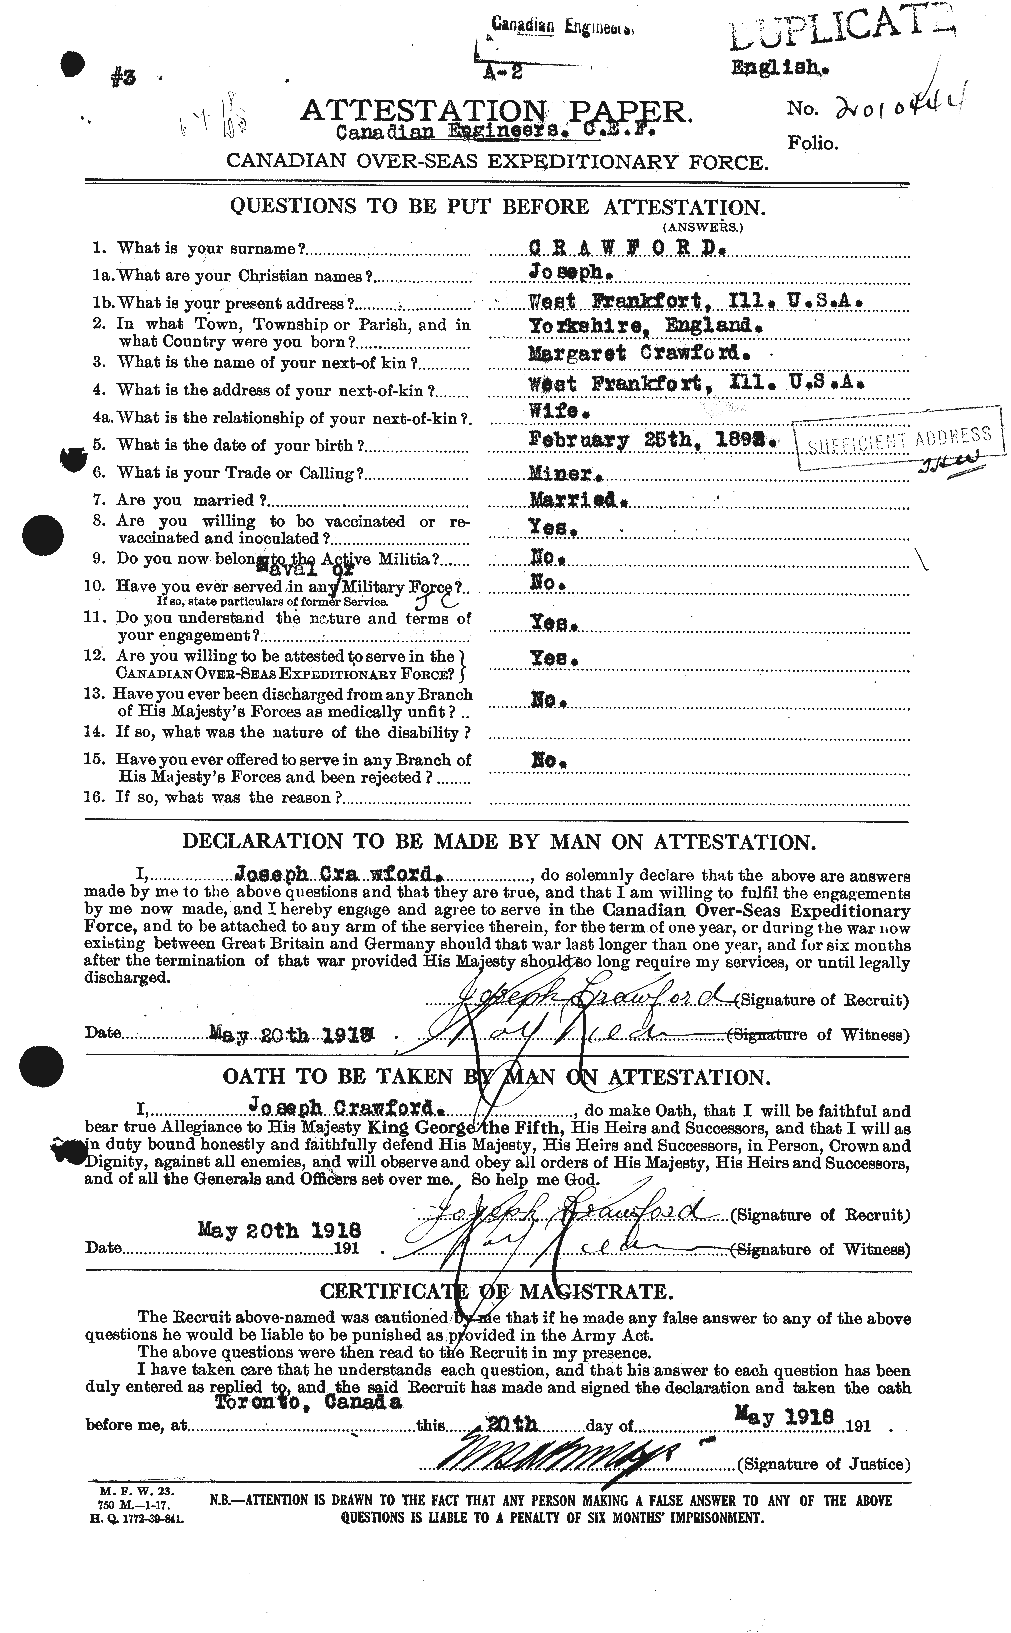 Personnel Records of the First World War - CEF 061811a